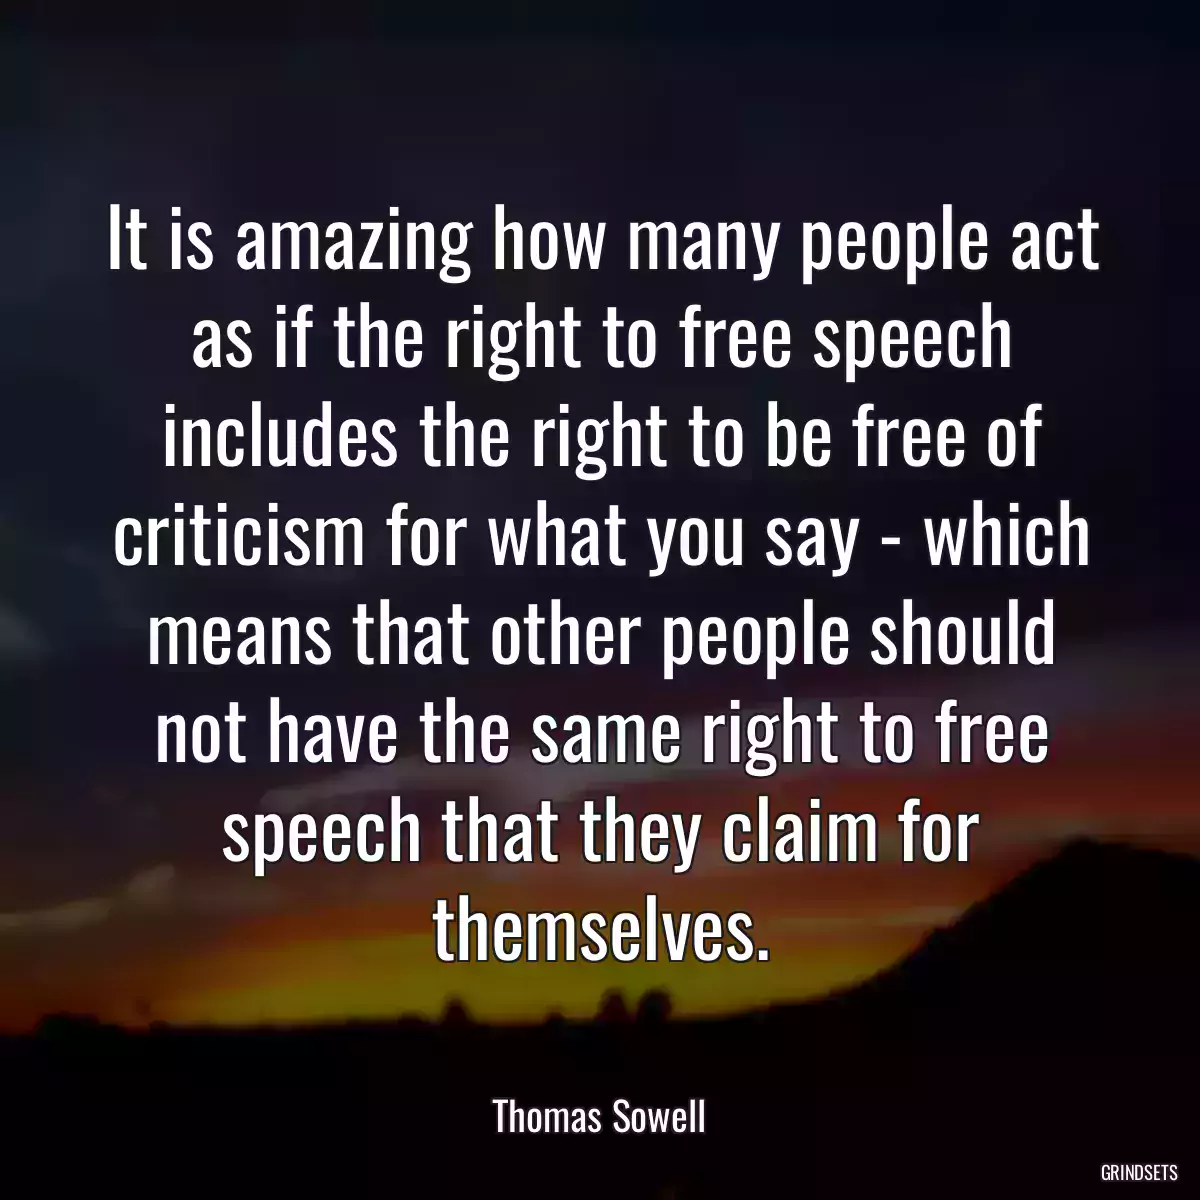 It is amazing how many people act as if the right to free speech includes the right to be free of criticism for what you say - which means that other people should not have the same right to free speech that they claim for themselves.